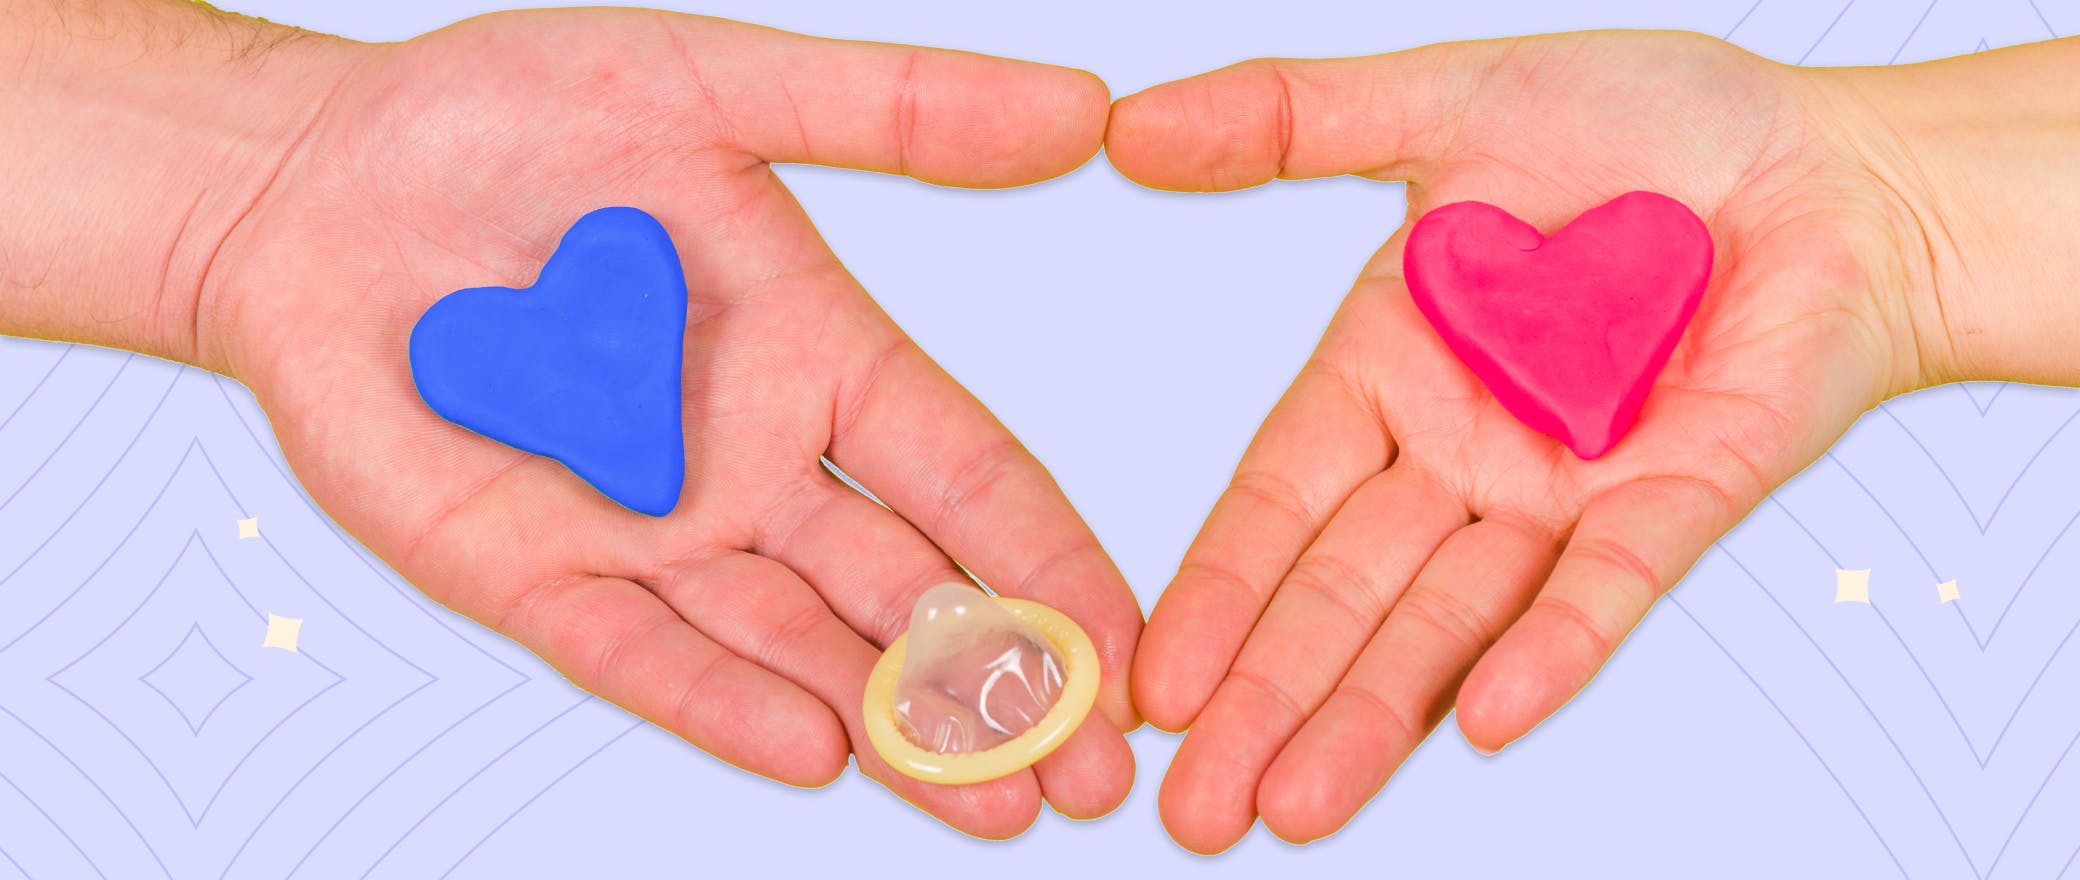 Two hands holding hearts and a condom